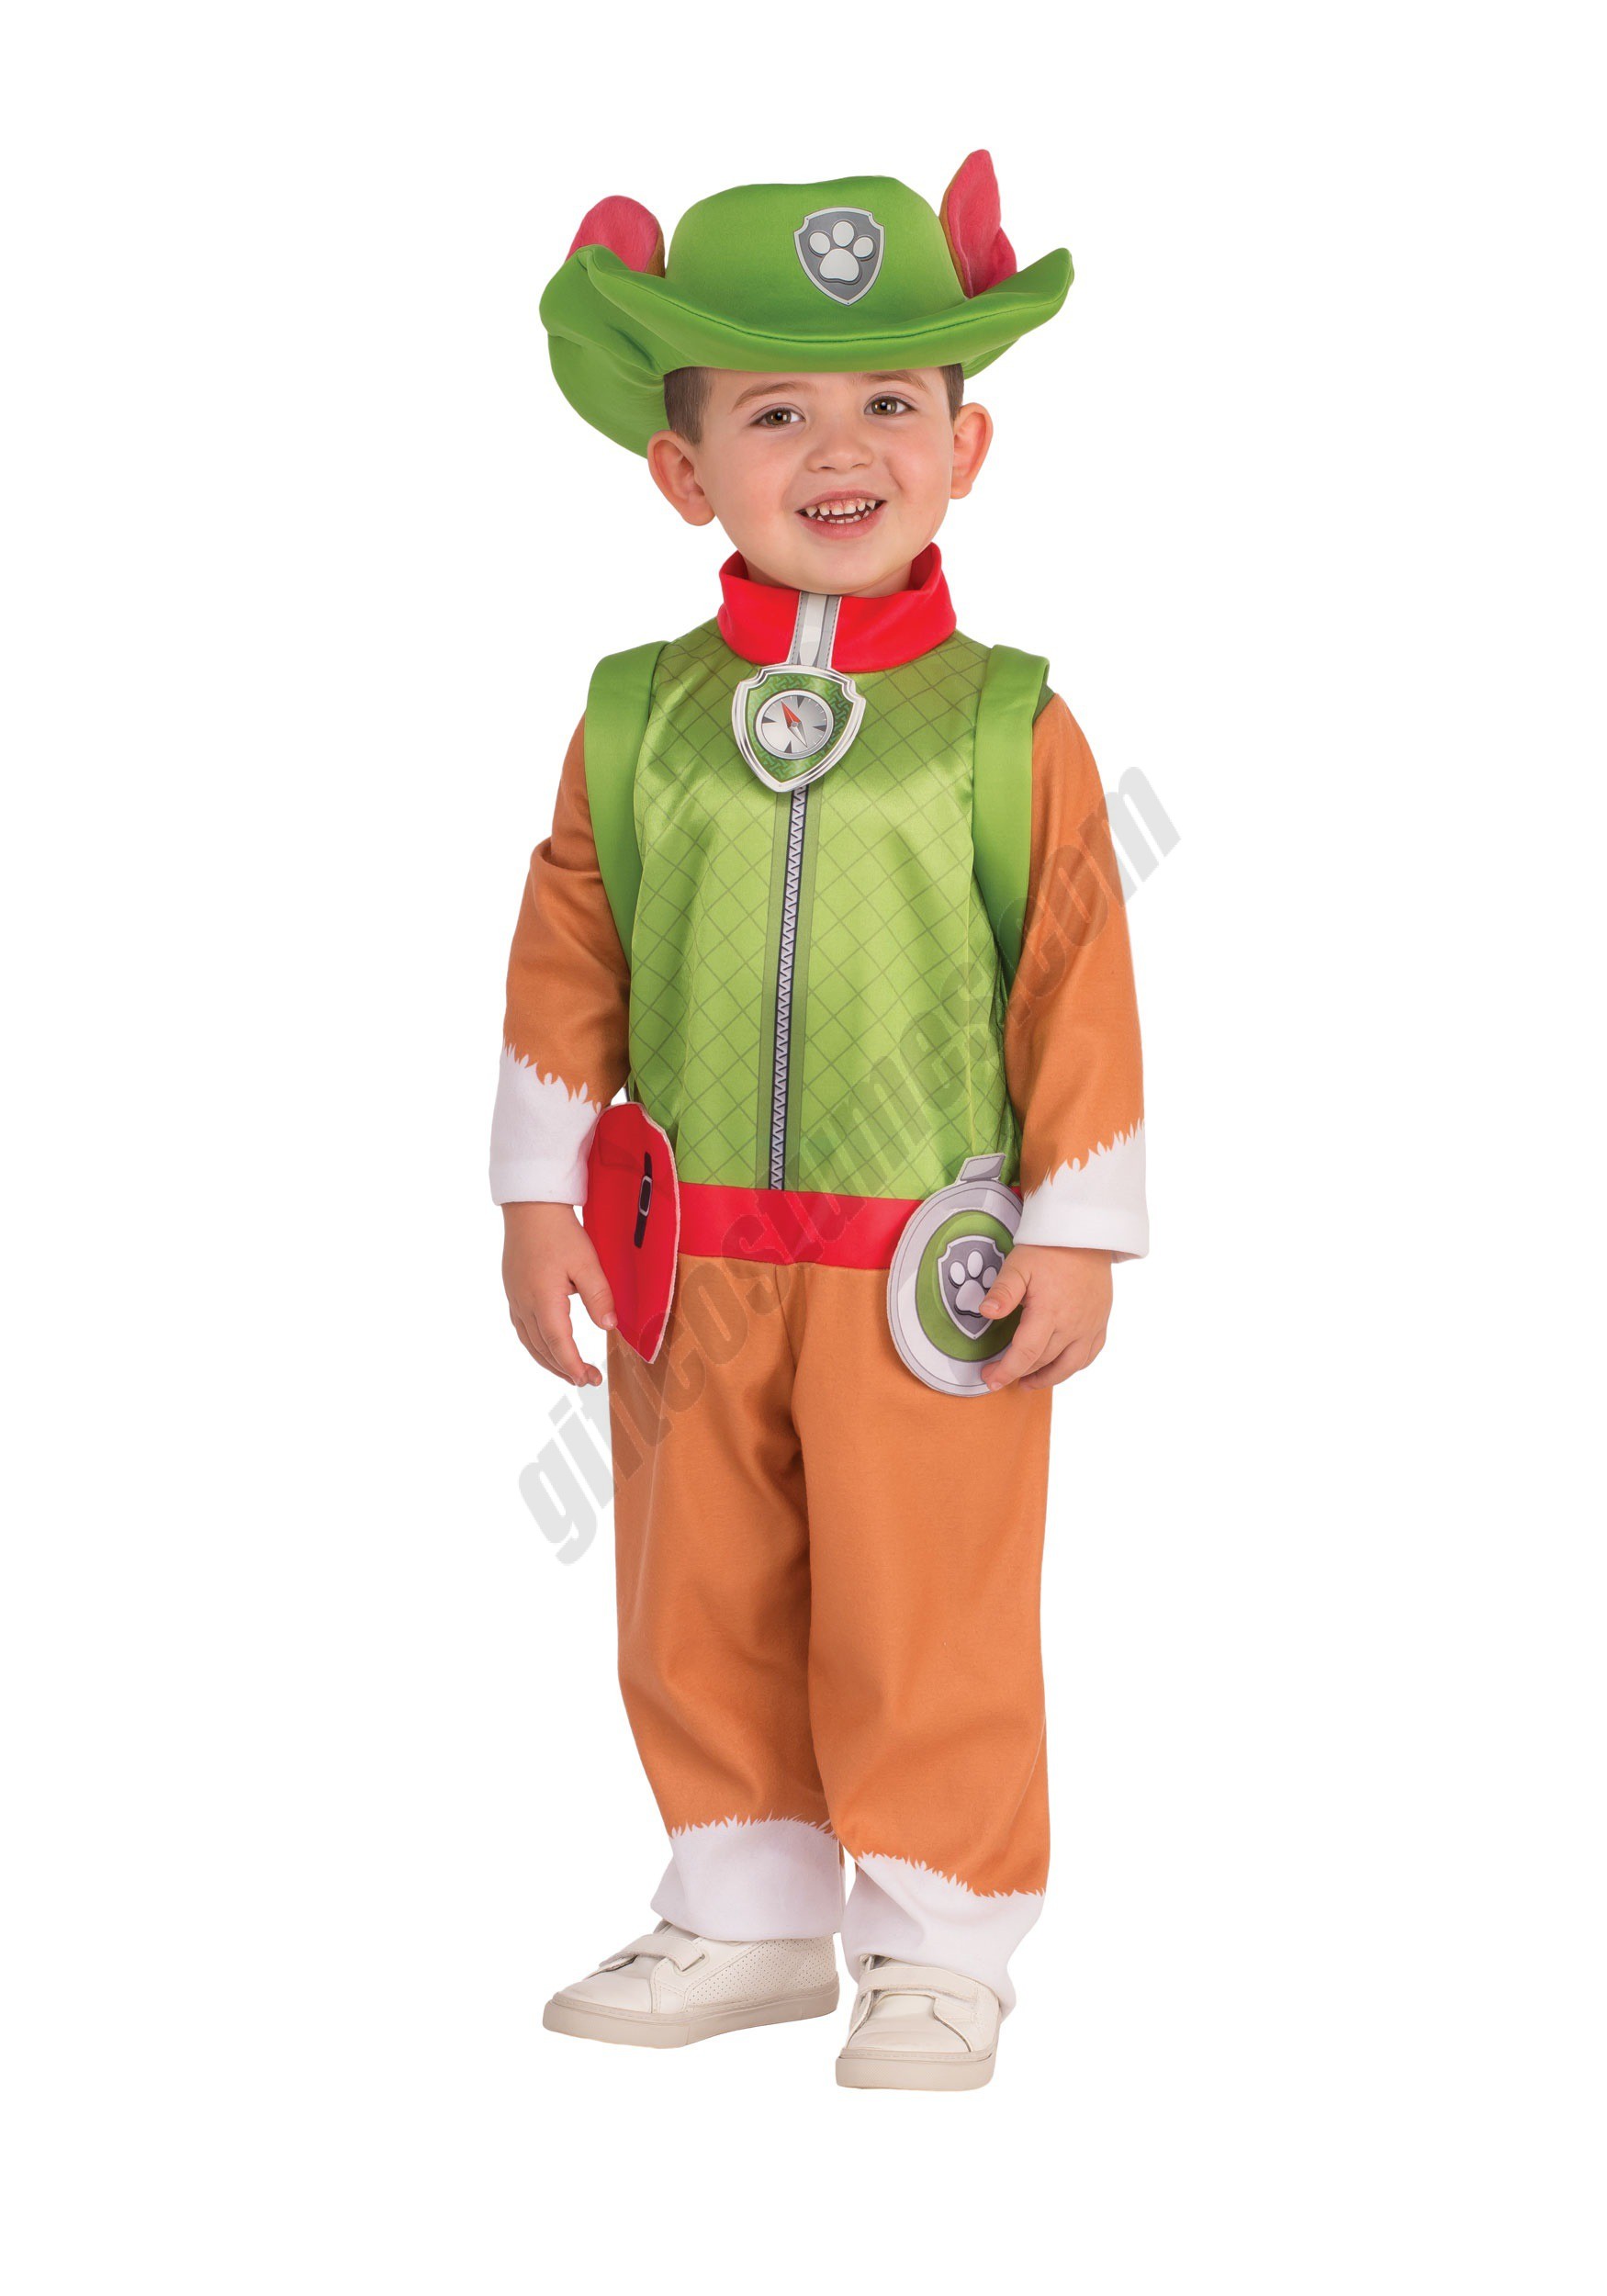 Toddler Tracker Costume from Paw Patrol Promotions - Toddler Tracker Costume from Paw Patrol Promotions